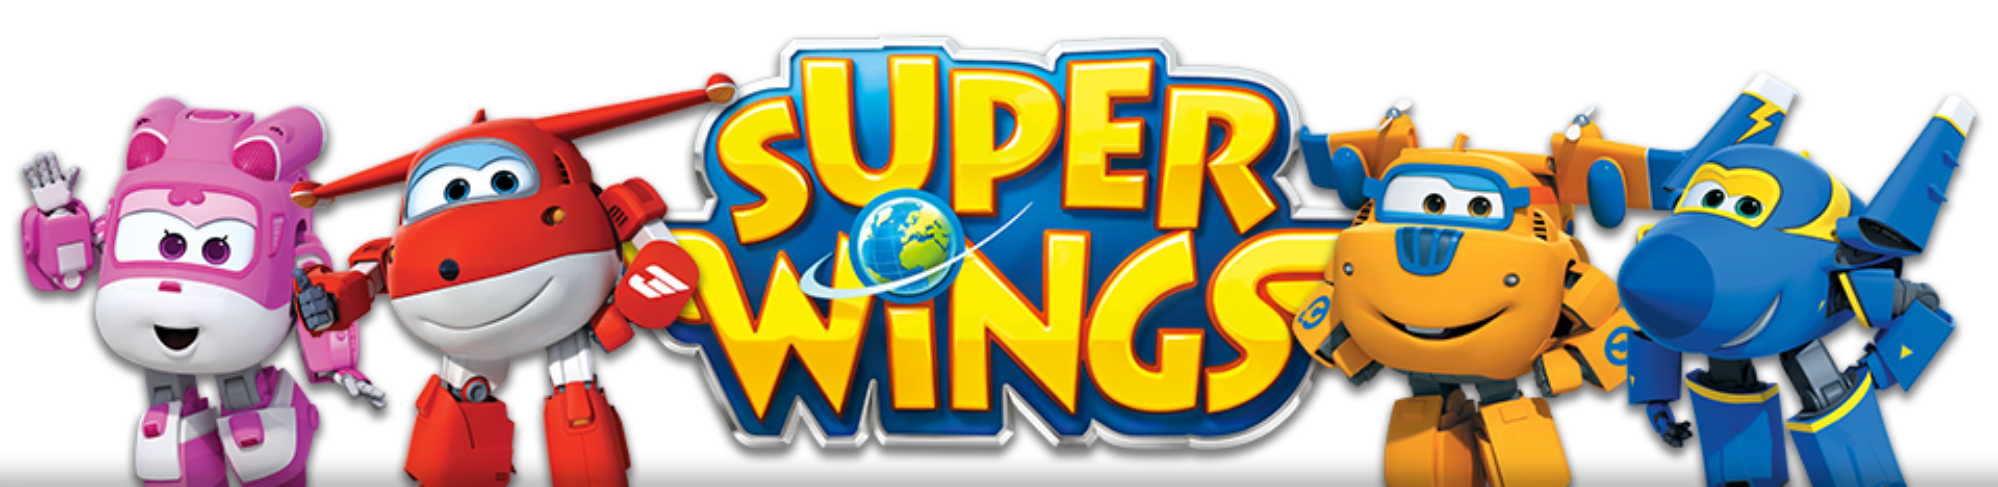 Super-Wings-Background-Super-Wings-8-PNG